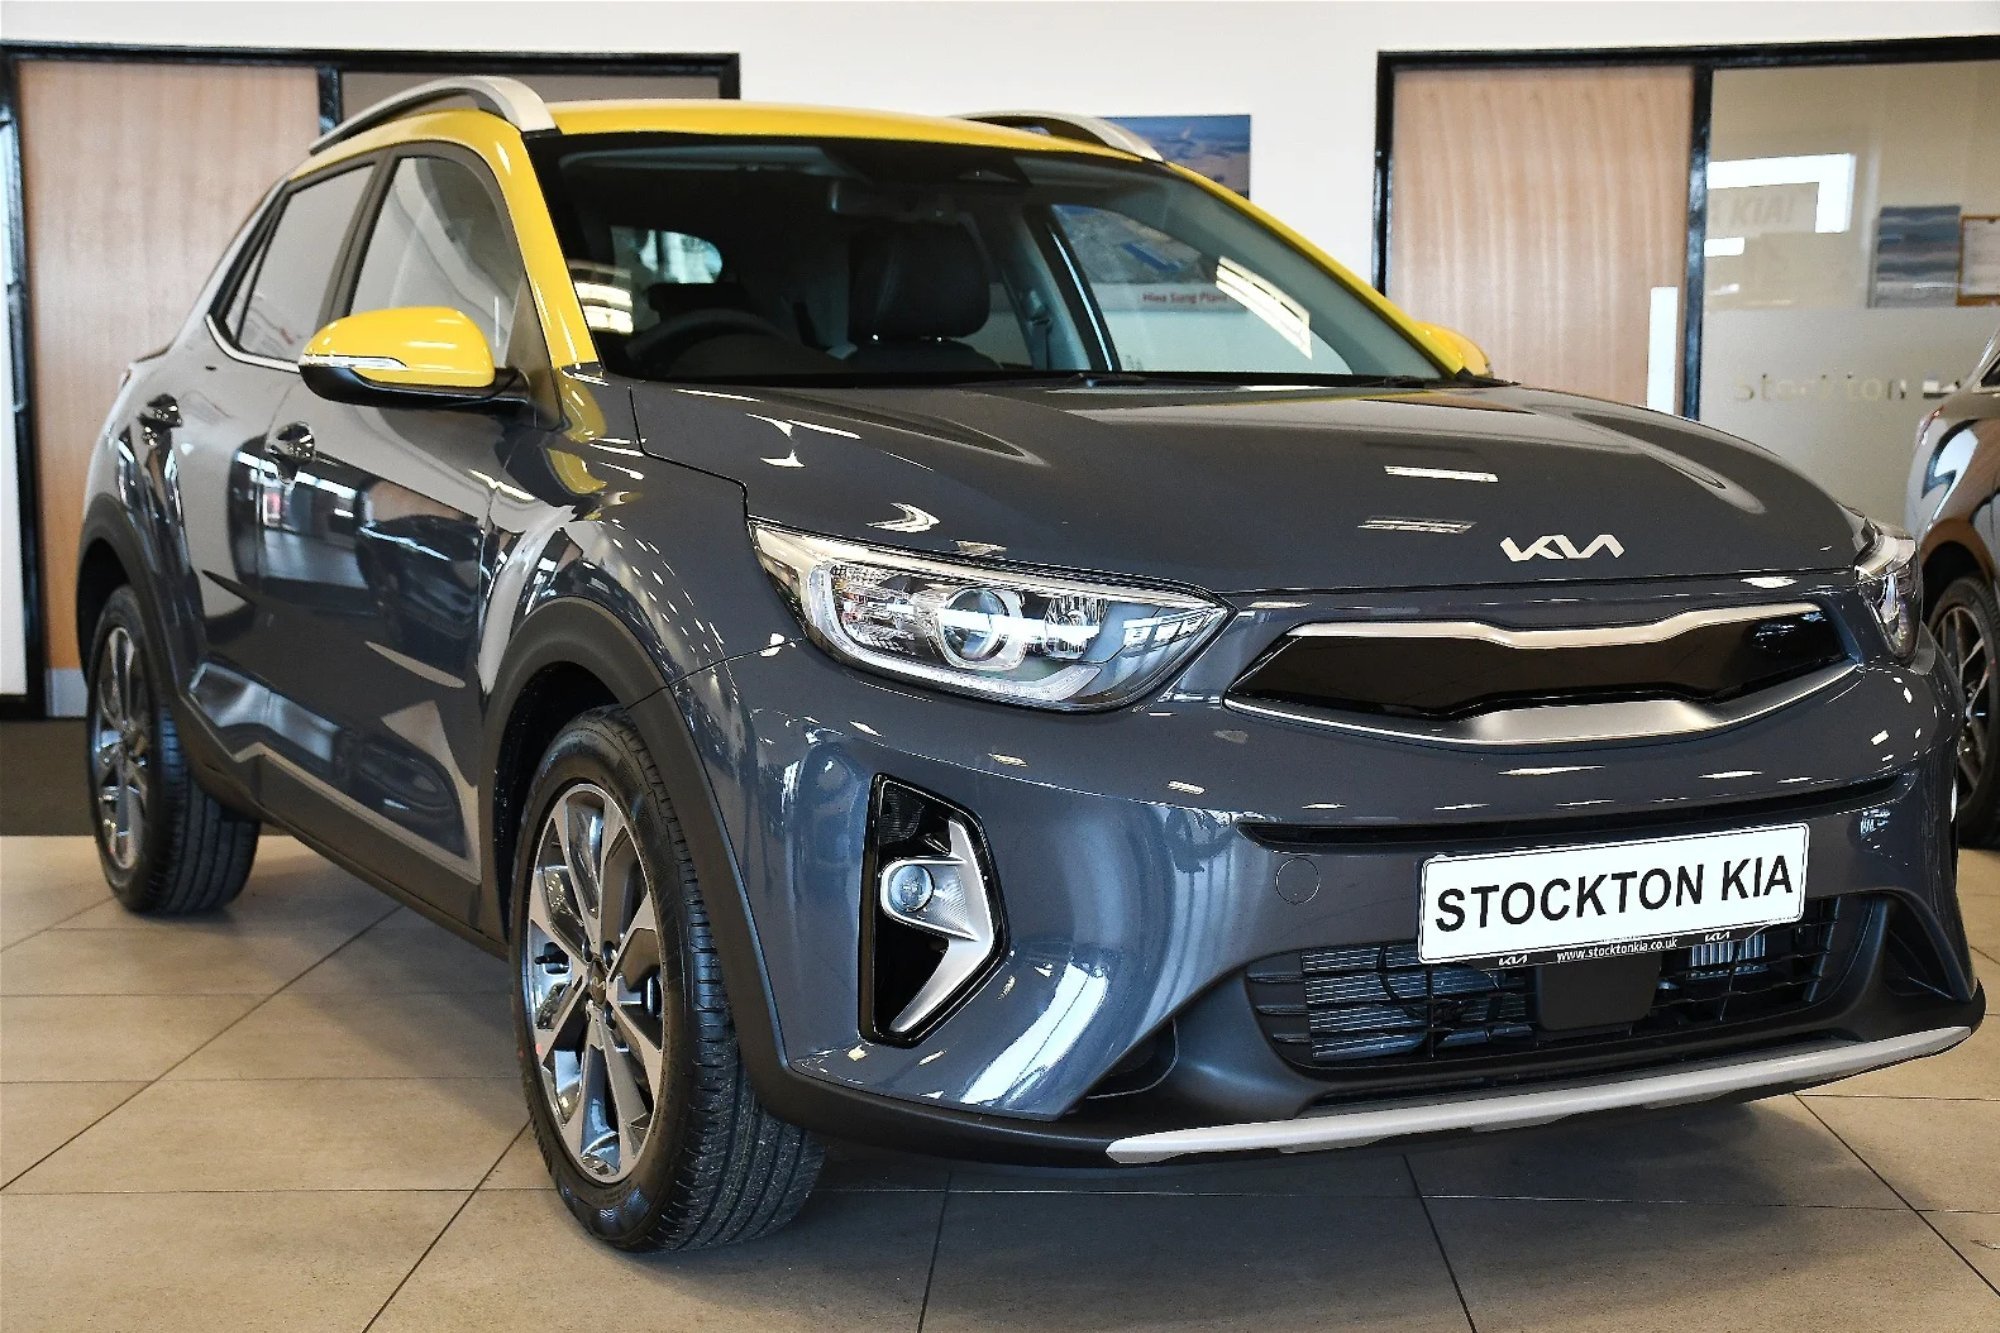 Kia Stonic Quantum Special Edition Has Rich Equipment But Is Only For UK